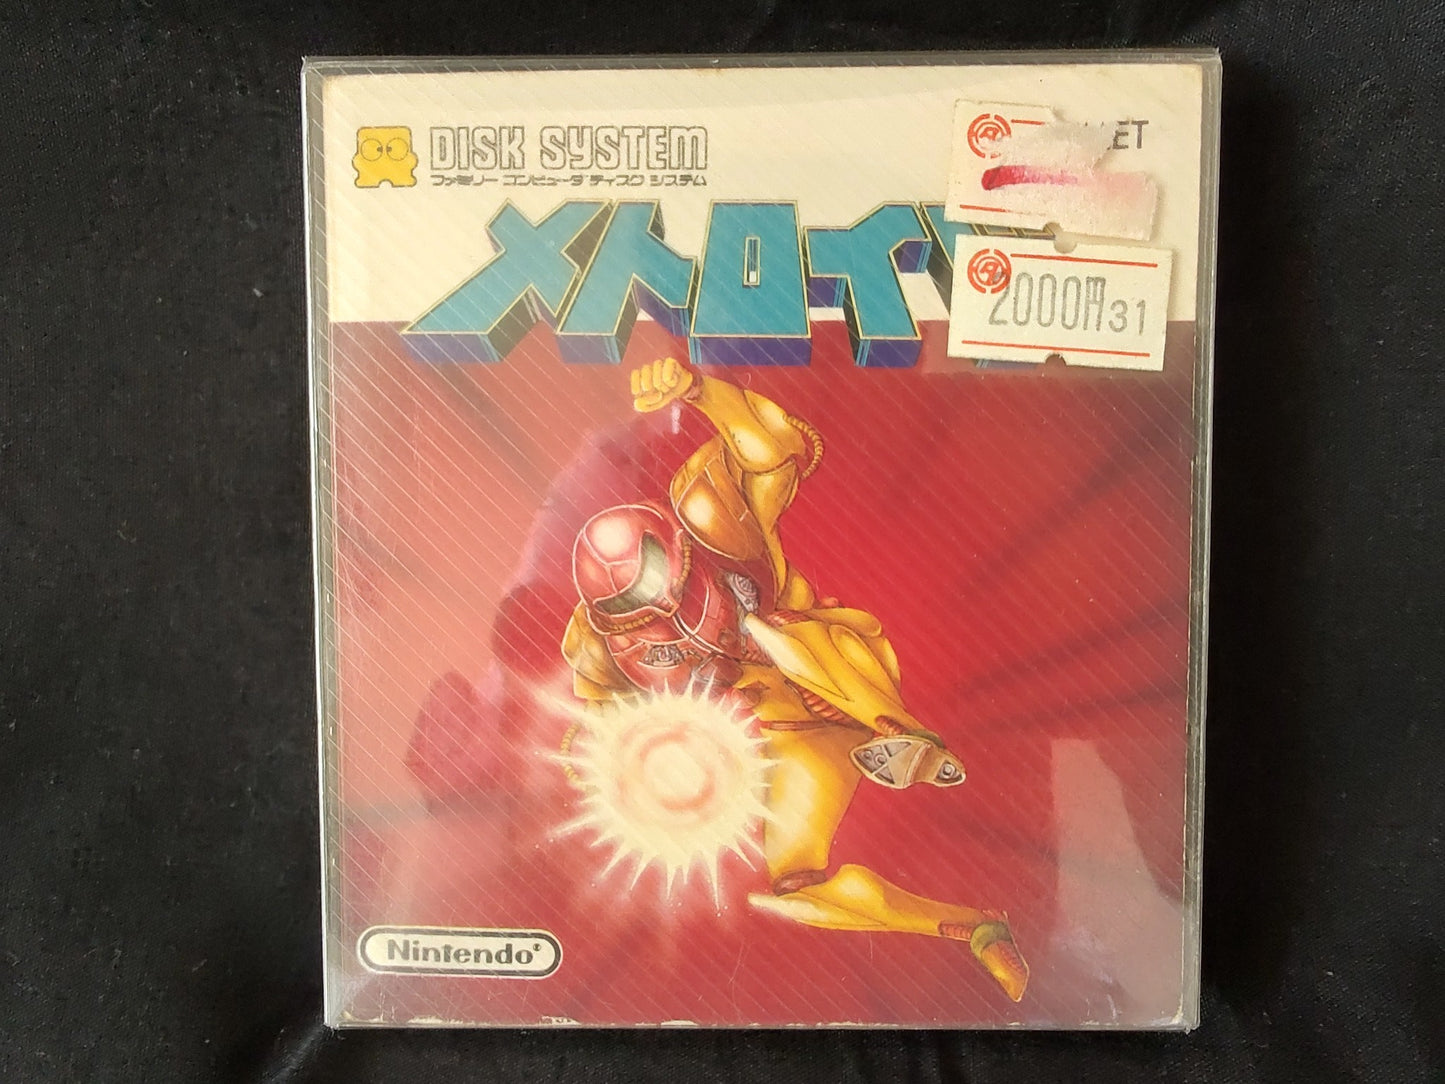 Metroid FAMICOM (NES) Disk System, Game disk and box set, tested-f0515-